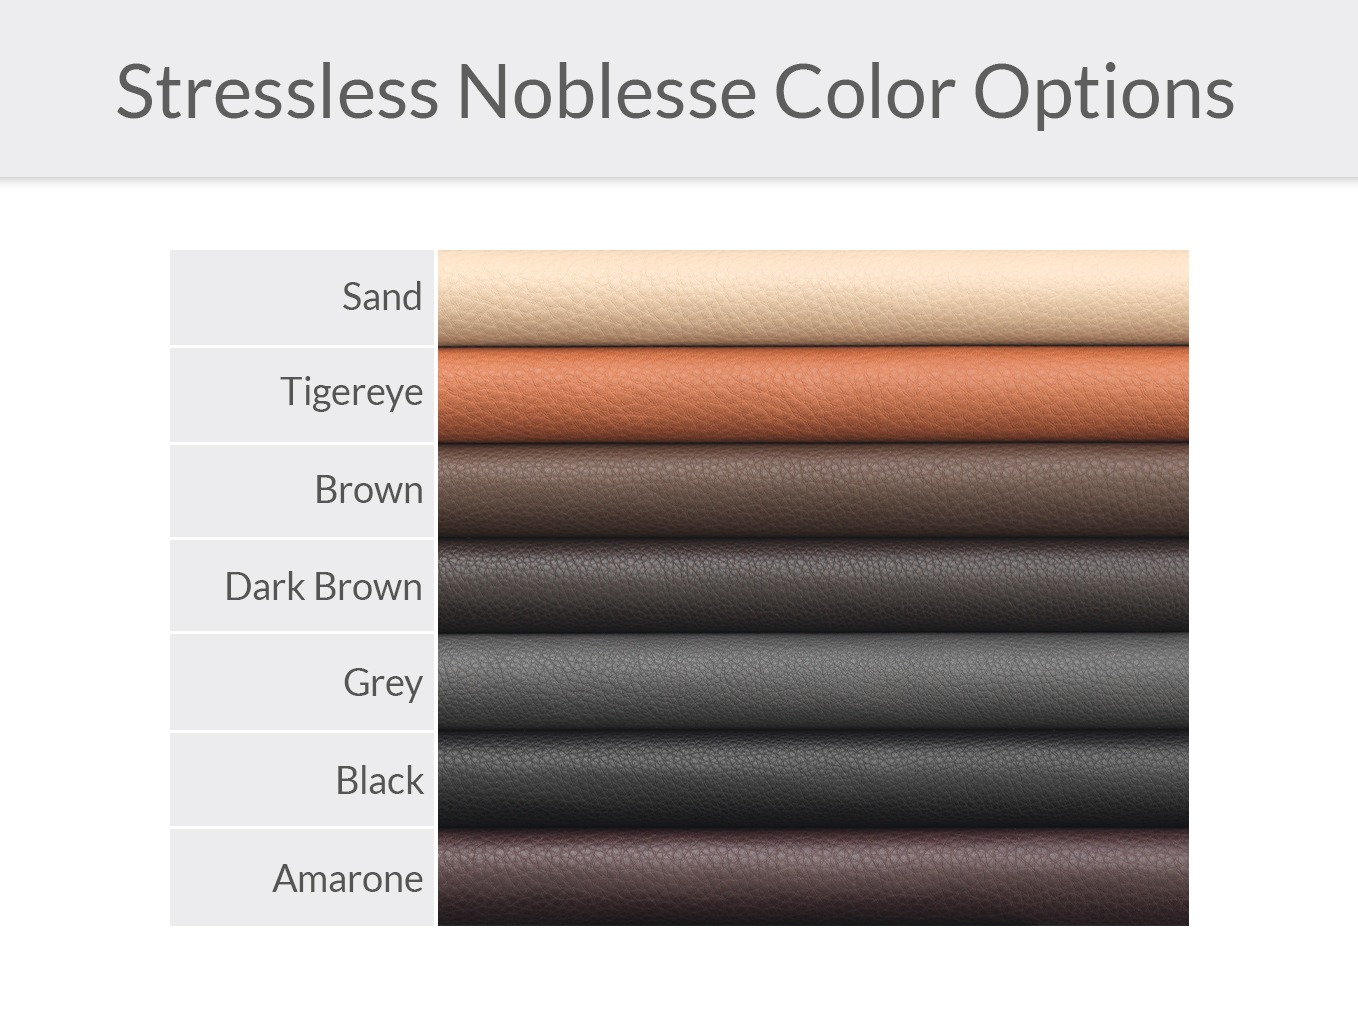 Stressless Noblesse Leather Color Options